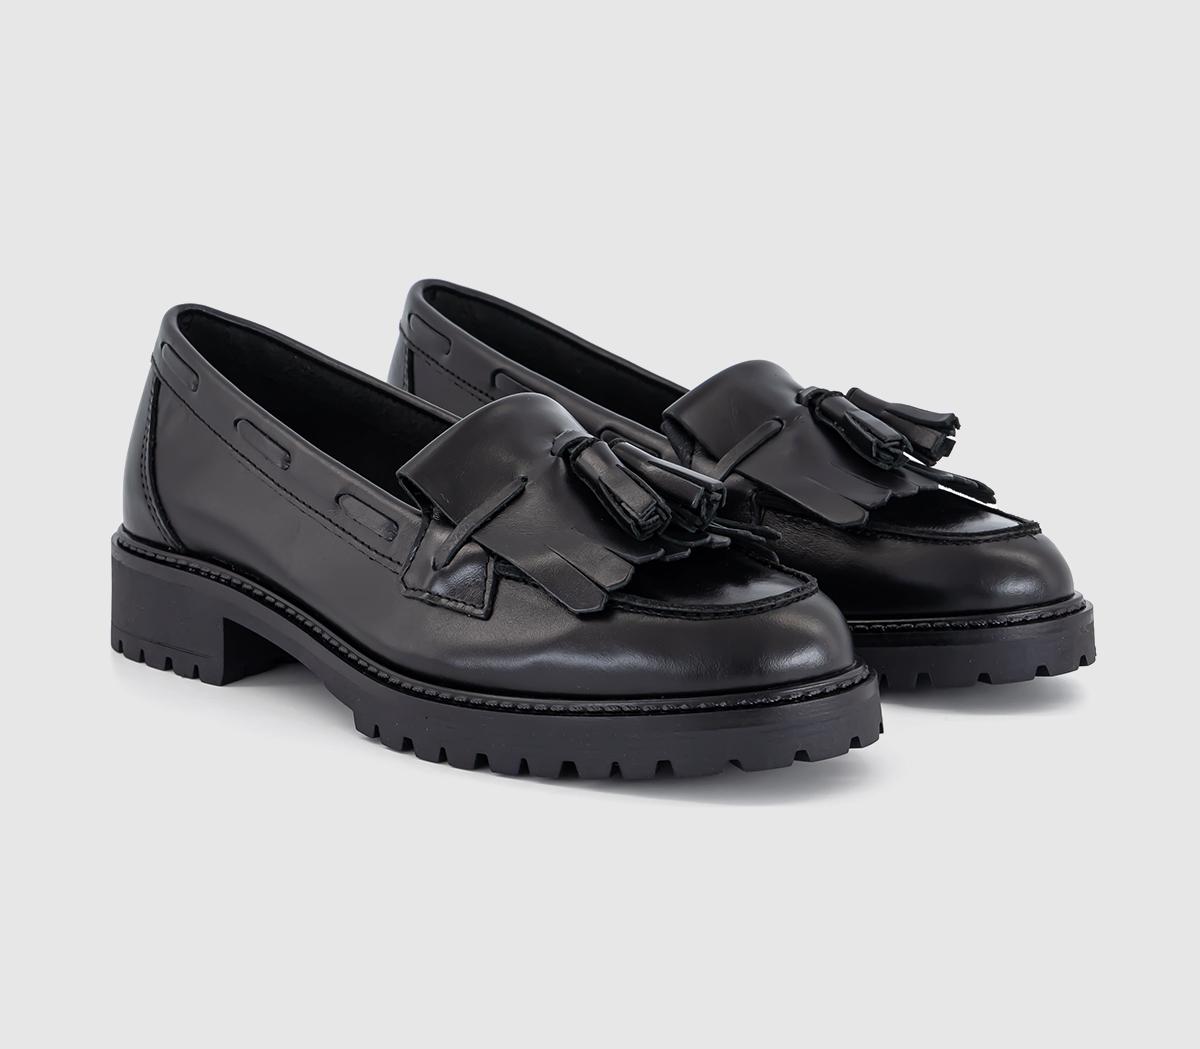 OFFICE Womens Frey Fringe Tassel Cleated Loafers Black Leather, 8